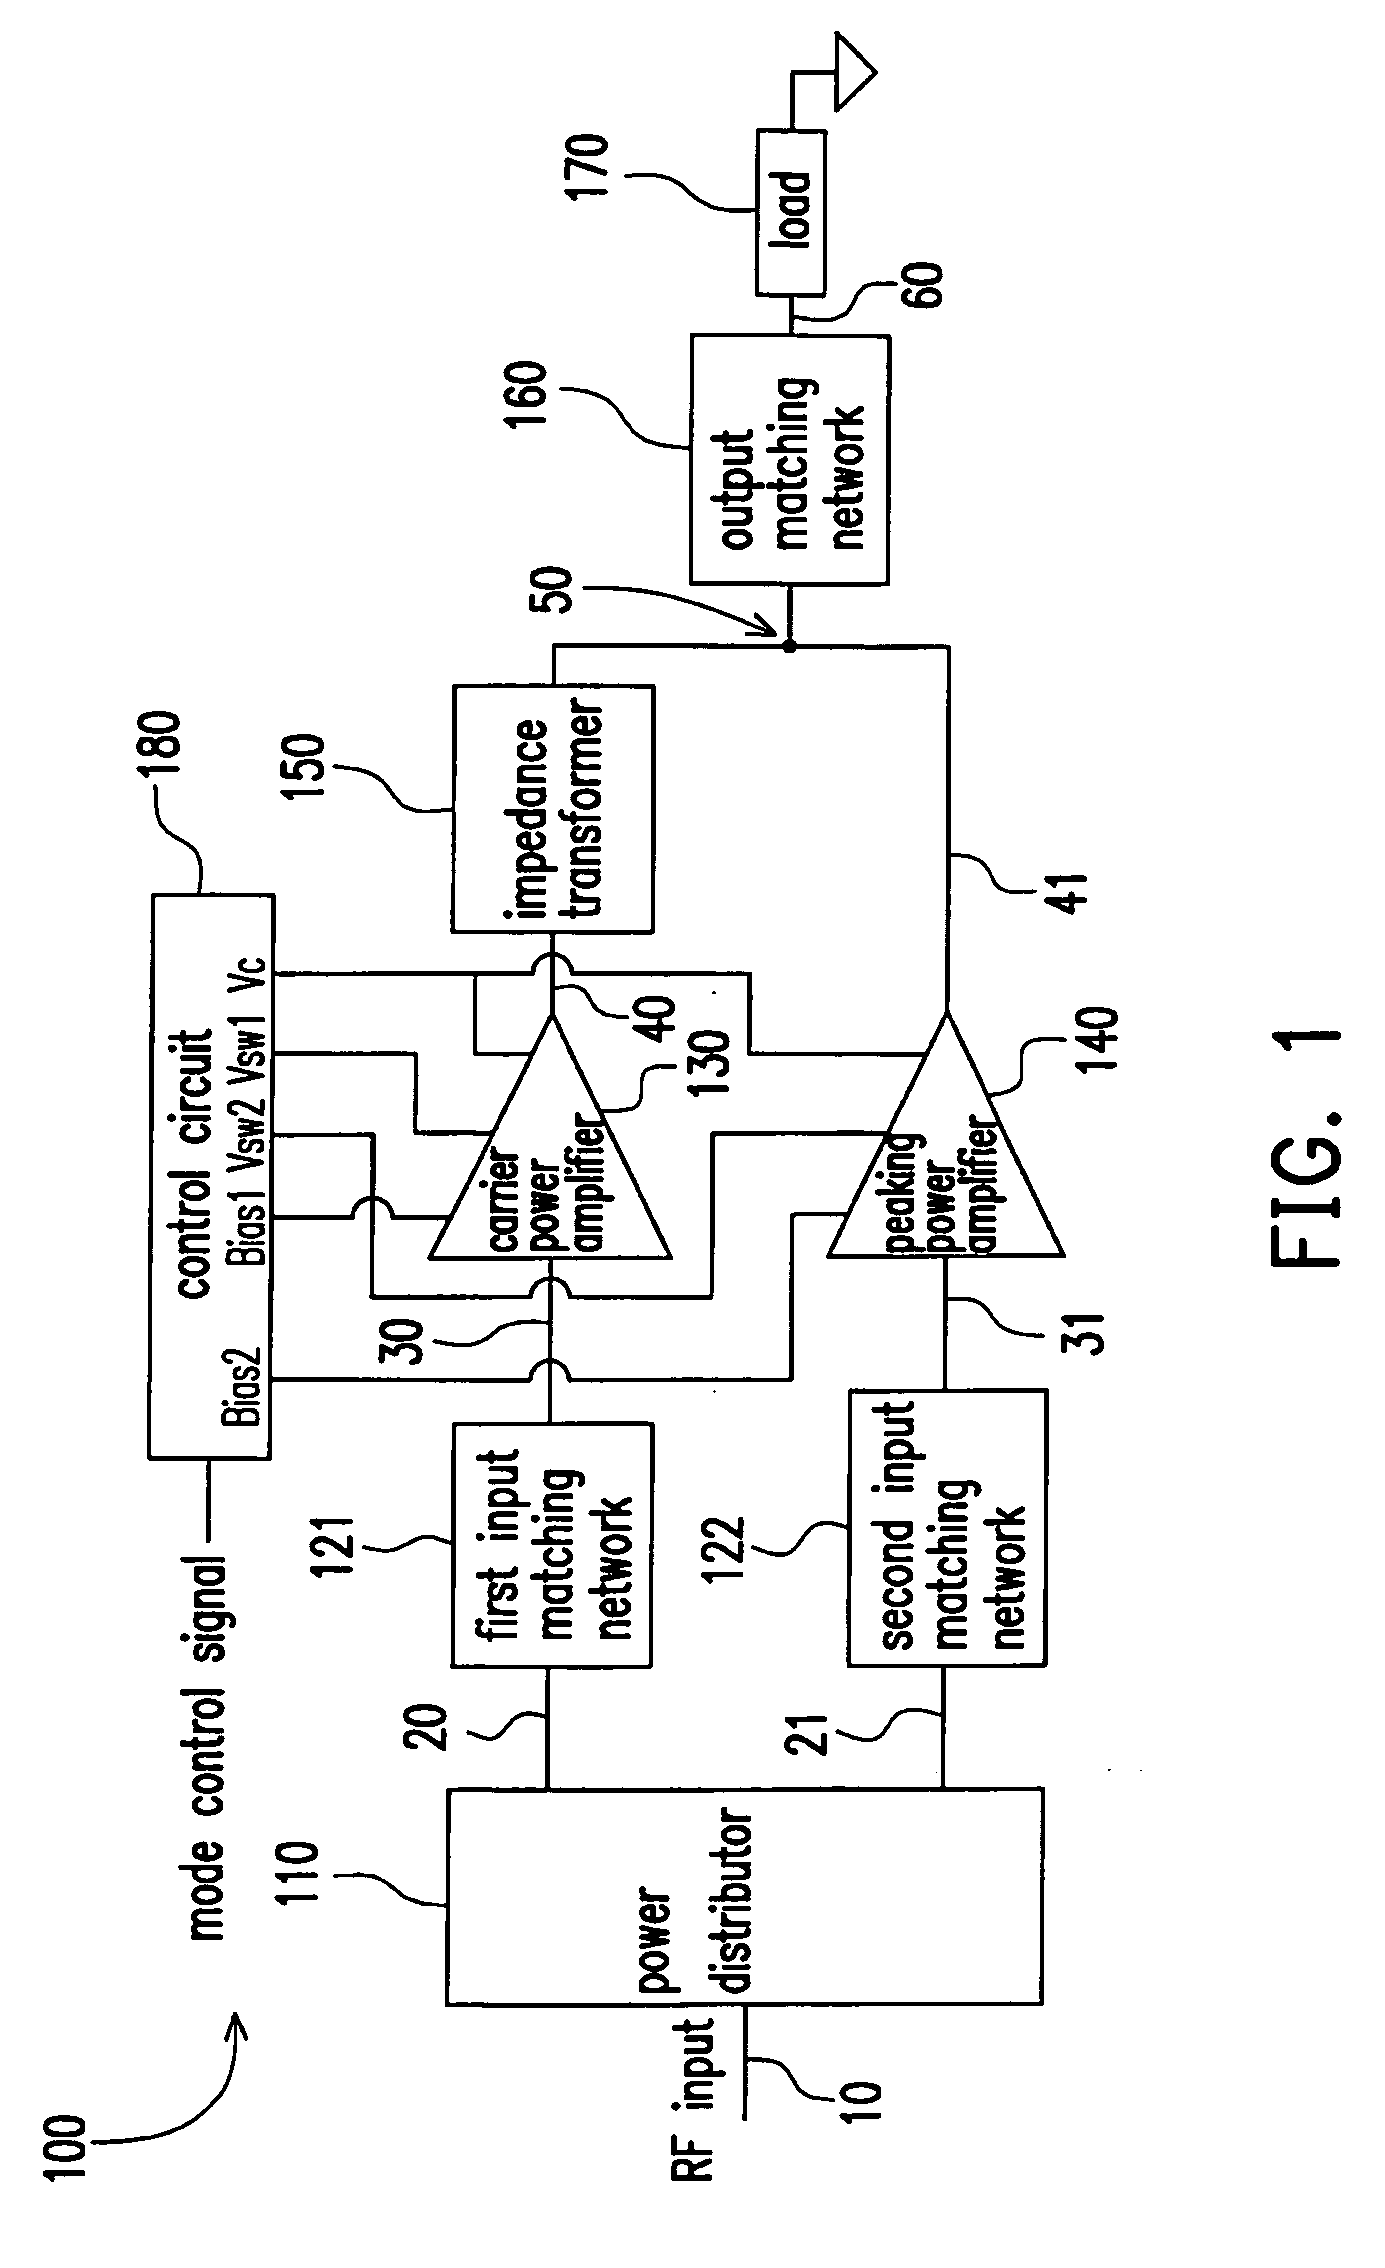 Power amplifier circuit for multi-frequencies and multi-modes and method for operating the same